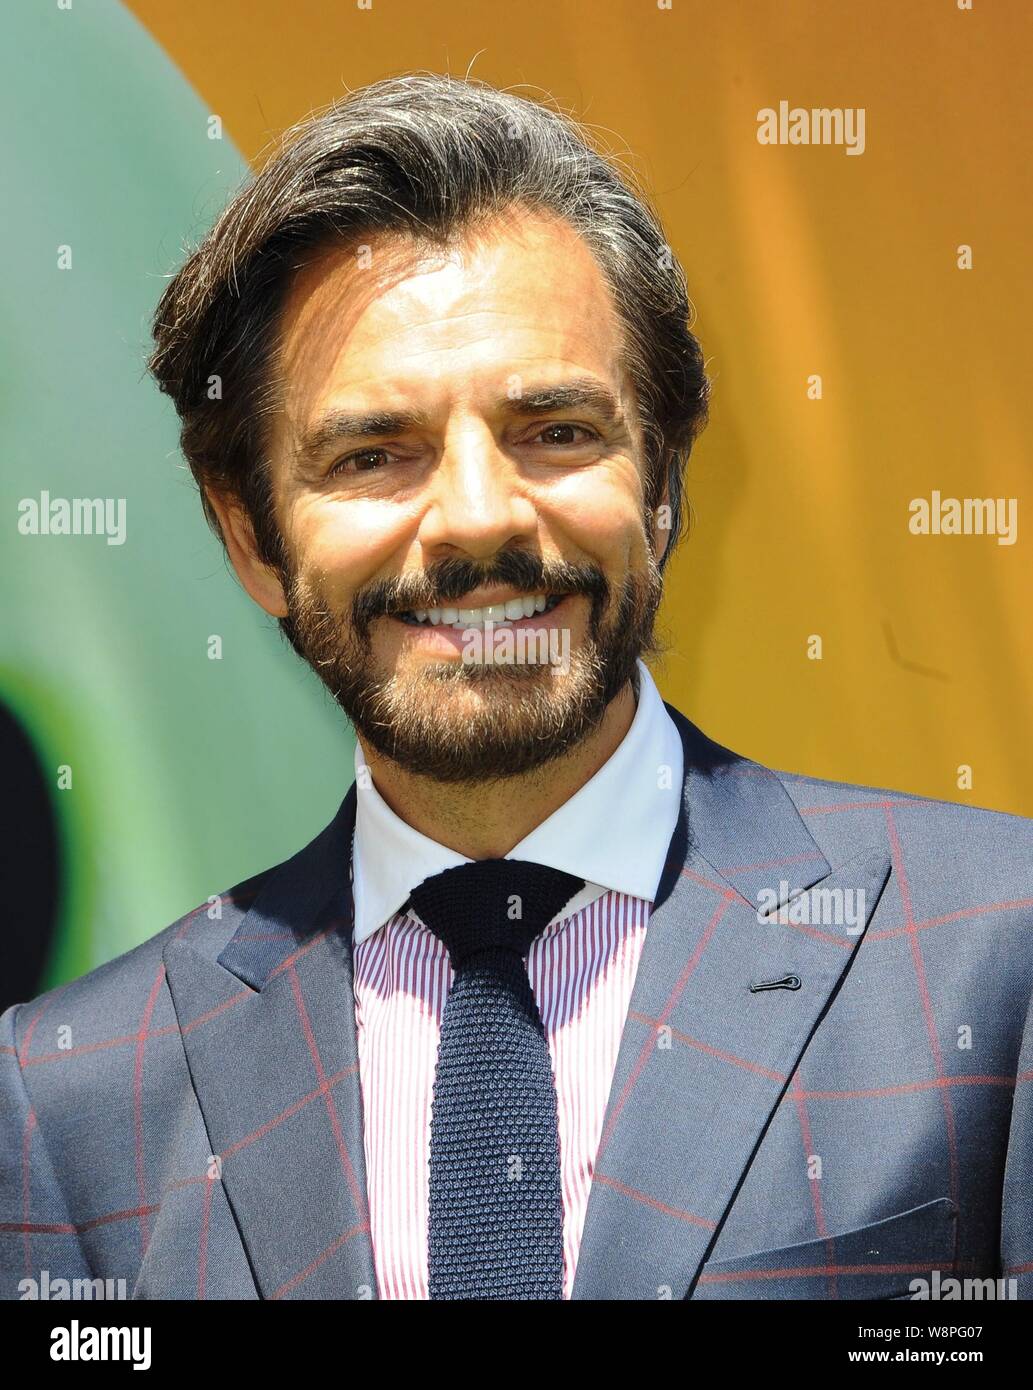 Los Angeles, CA. 10th Aug, 2019. Eugenio Derbez at arrivals for THE ANGRY BIRDS MOVIE 2 Premiere, Regency Village Theatre - Westwood, Los Angeles, CA August 10, 2019. Credit: Elizabeth Goodenough/Everett Collection/Alamy Live News Stock Photo